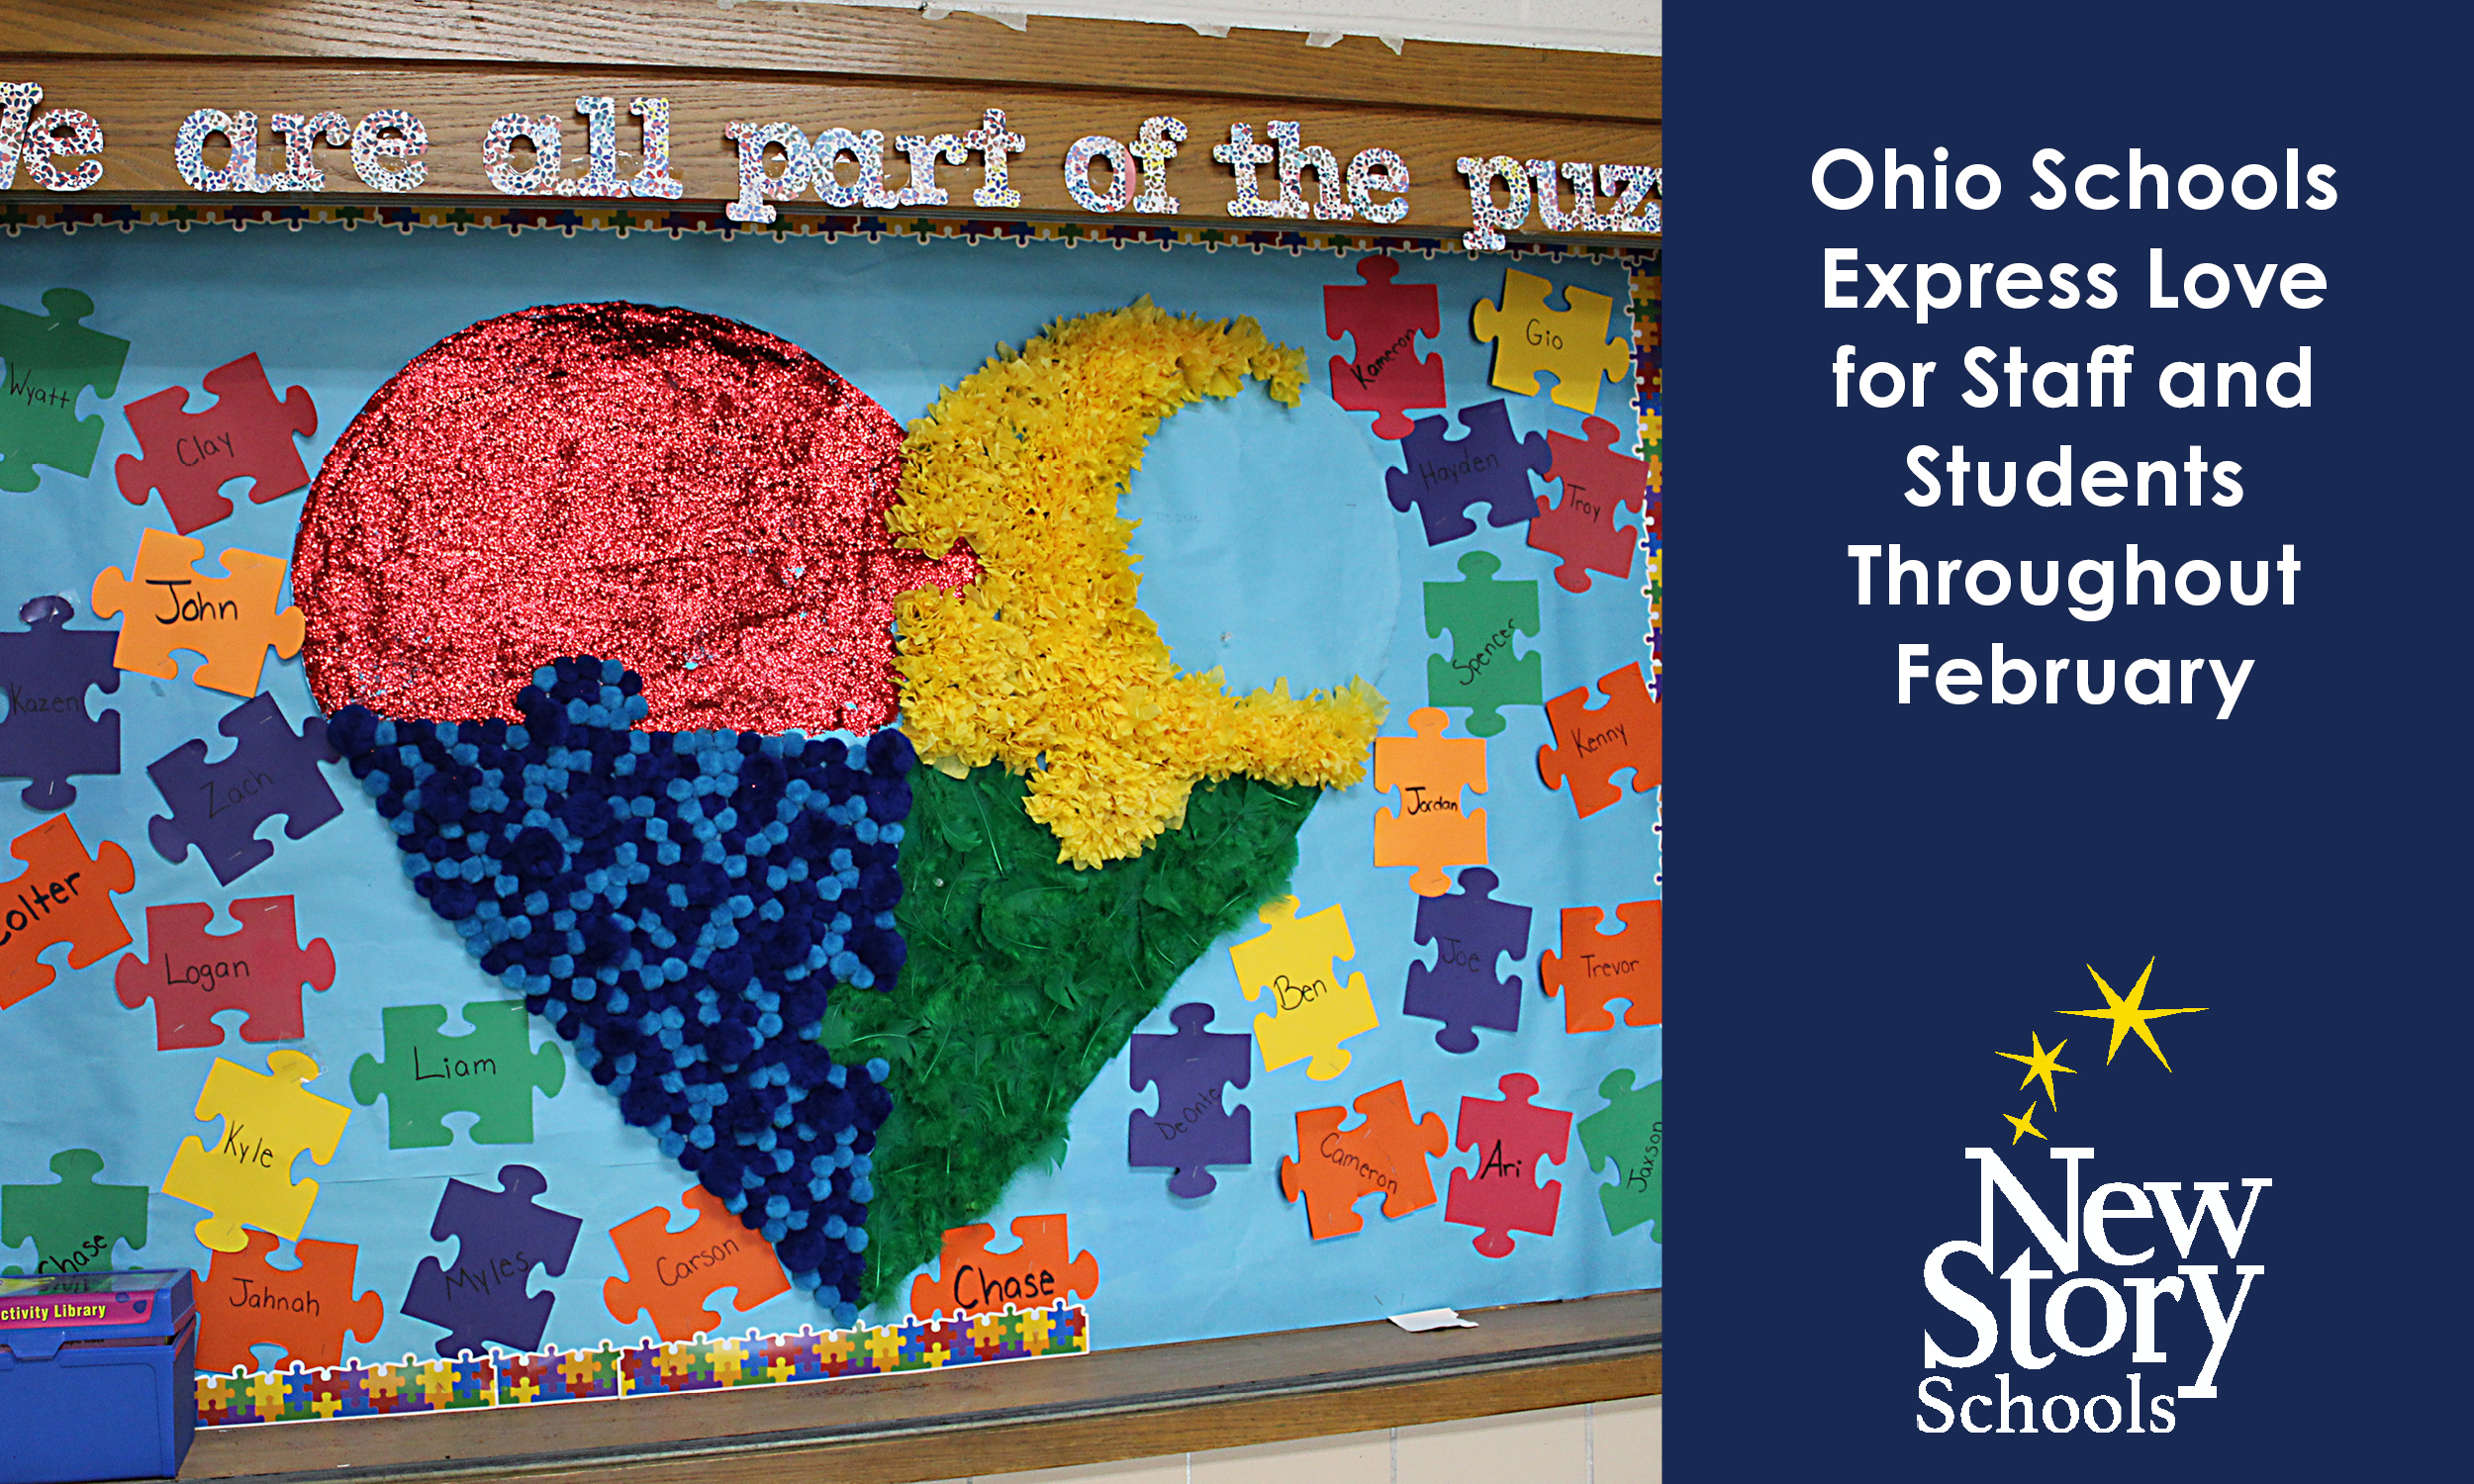 Ohio Schools Express Love for Staff and Students Throughout February